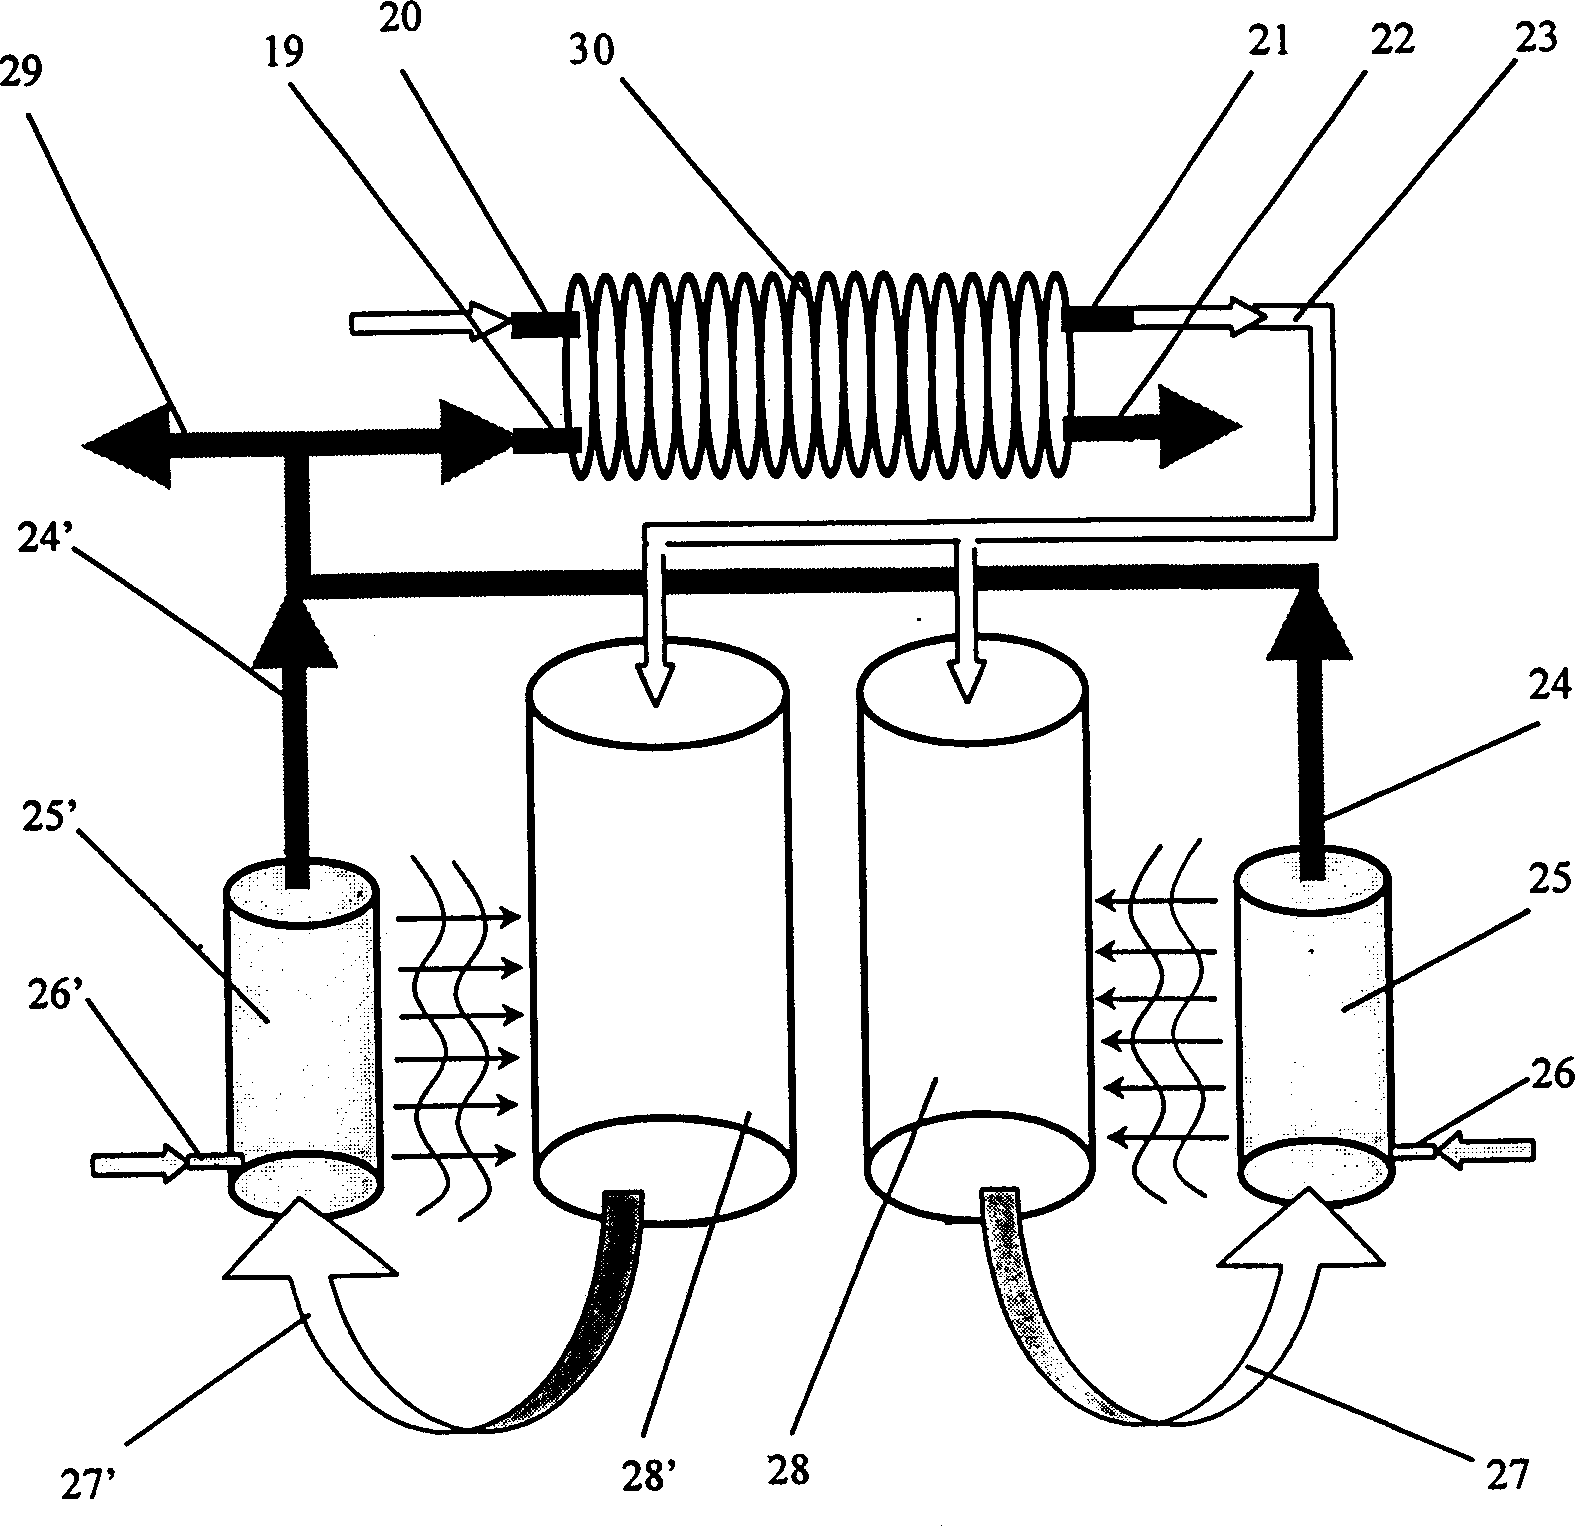 Pneumatic oil and gas mixed-power automobile